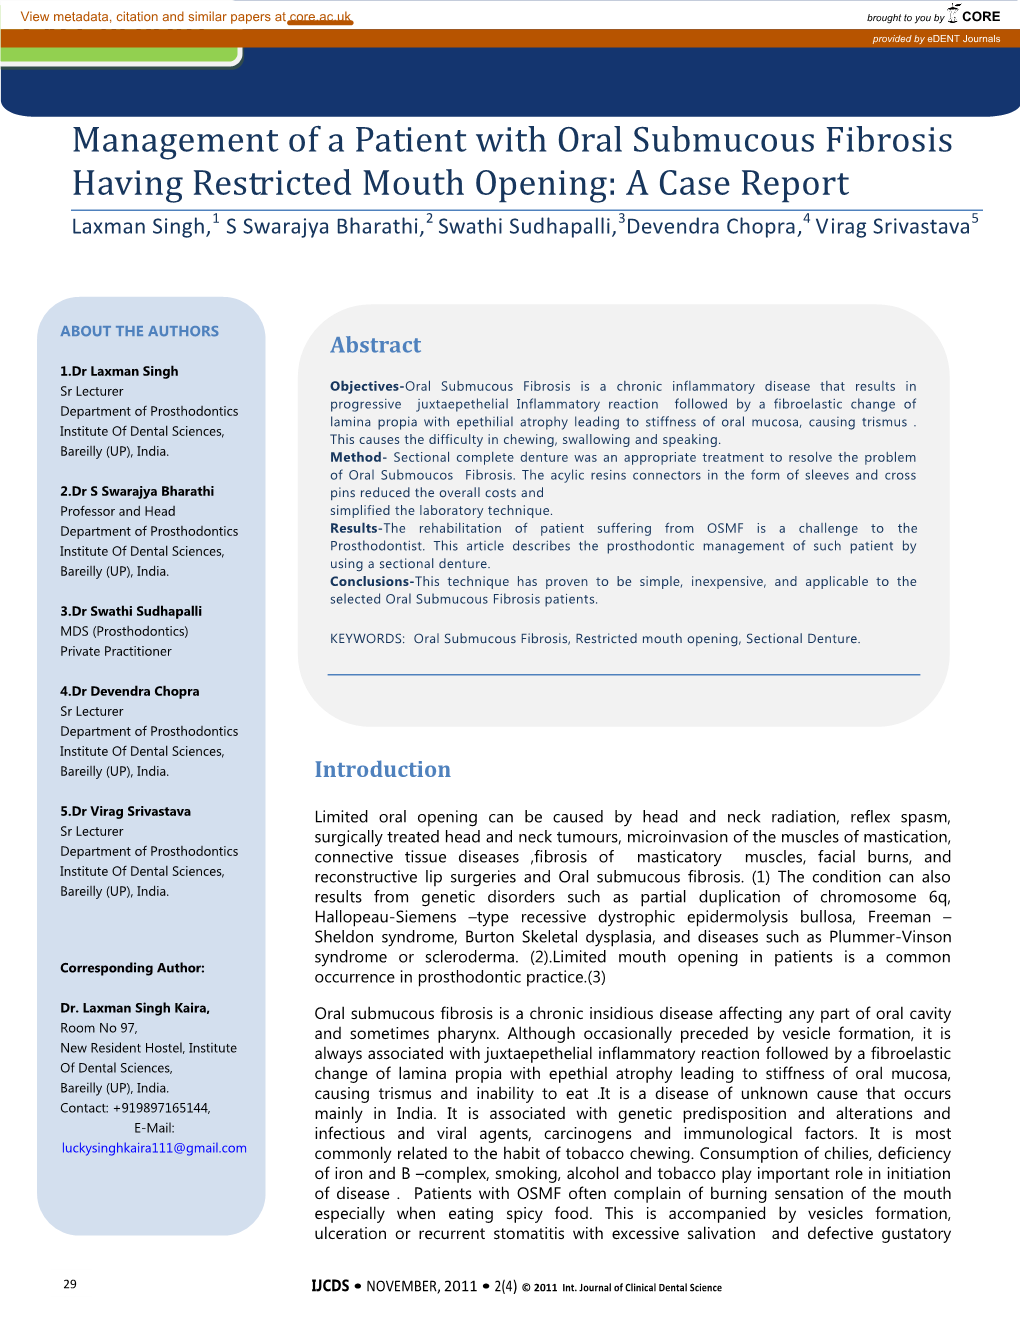 Management of a Patient with Oral Submucous Fibrosis Having Restricted Mouth Opening: a Case Report